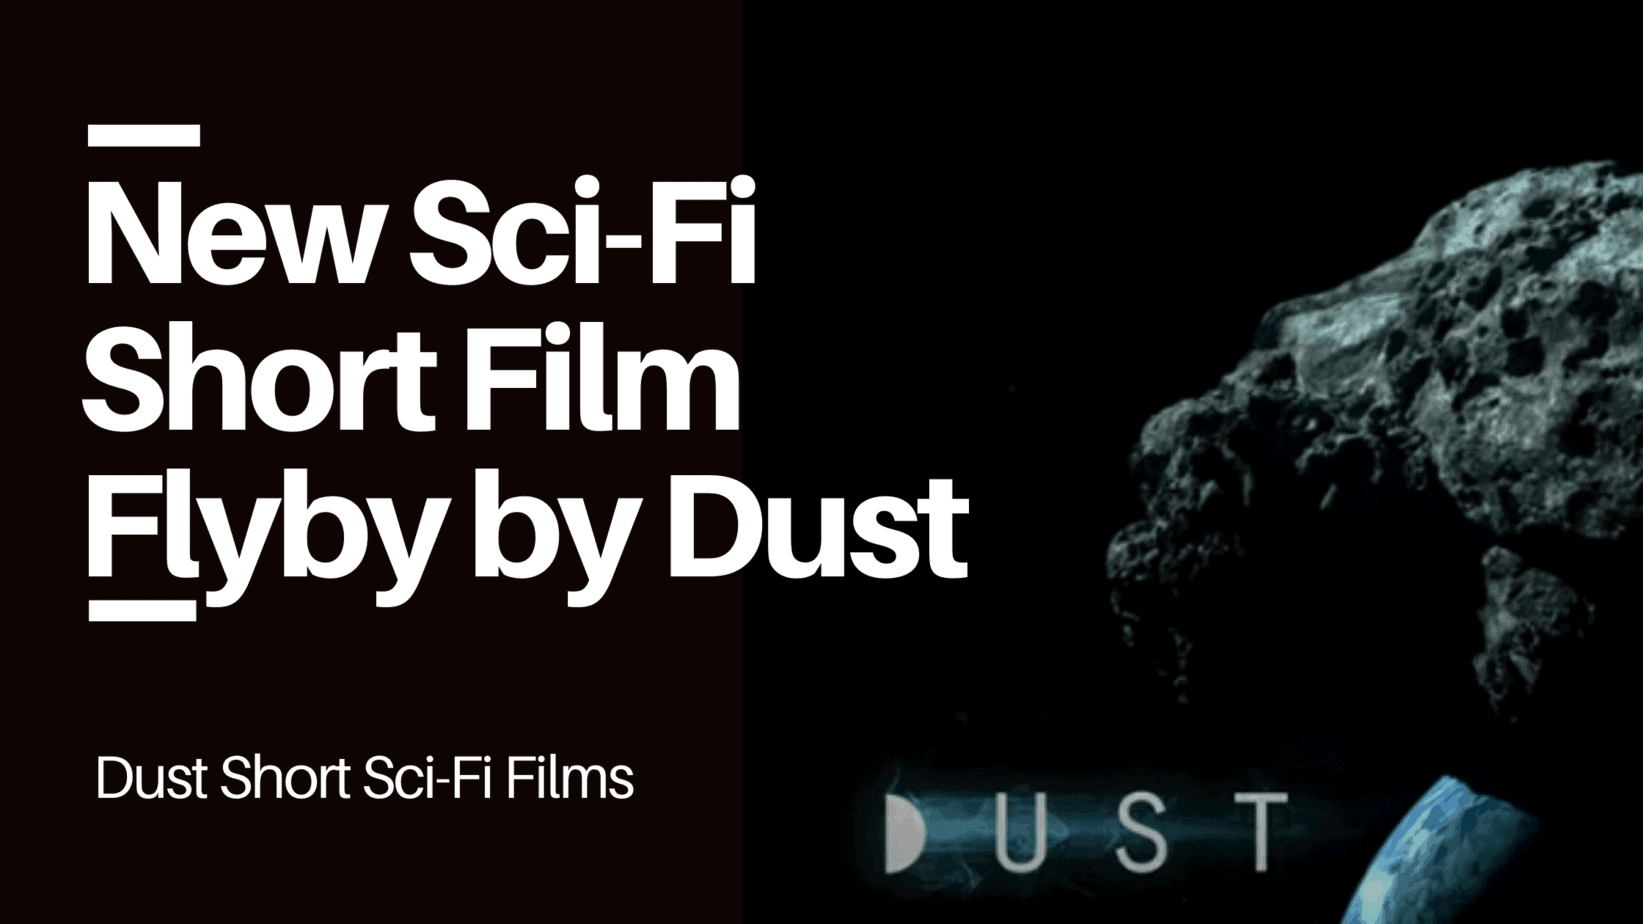 Flyby by Dust feature image